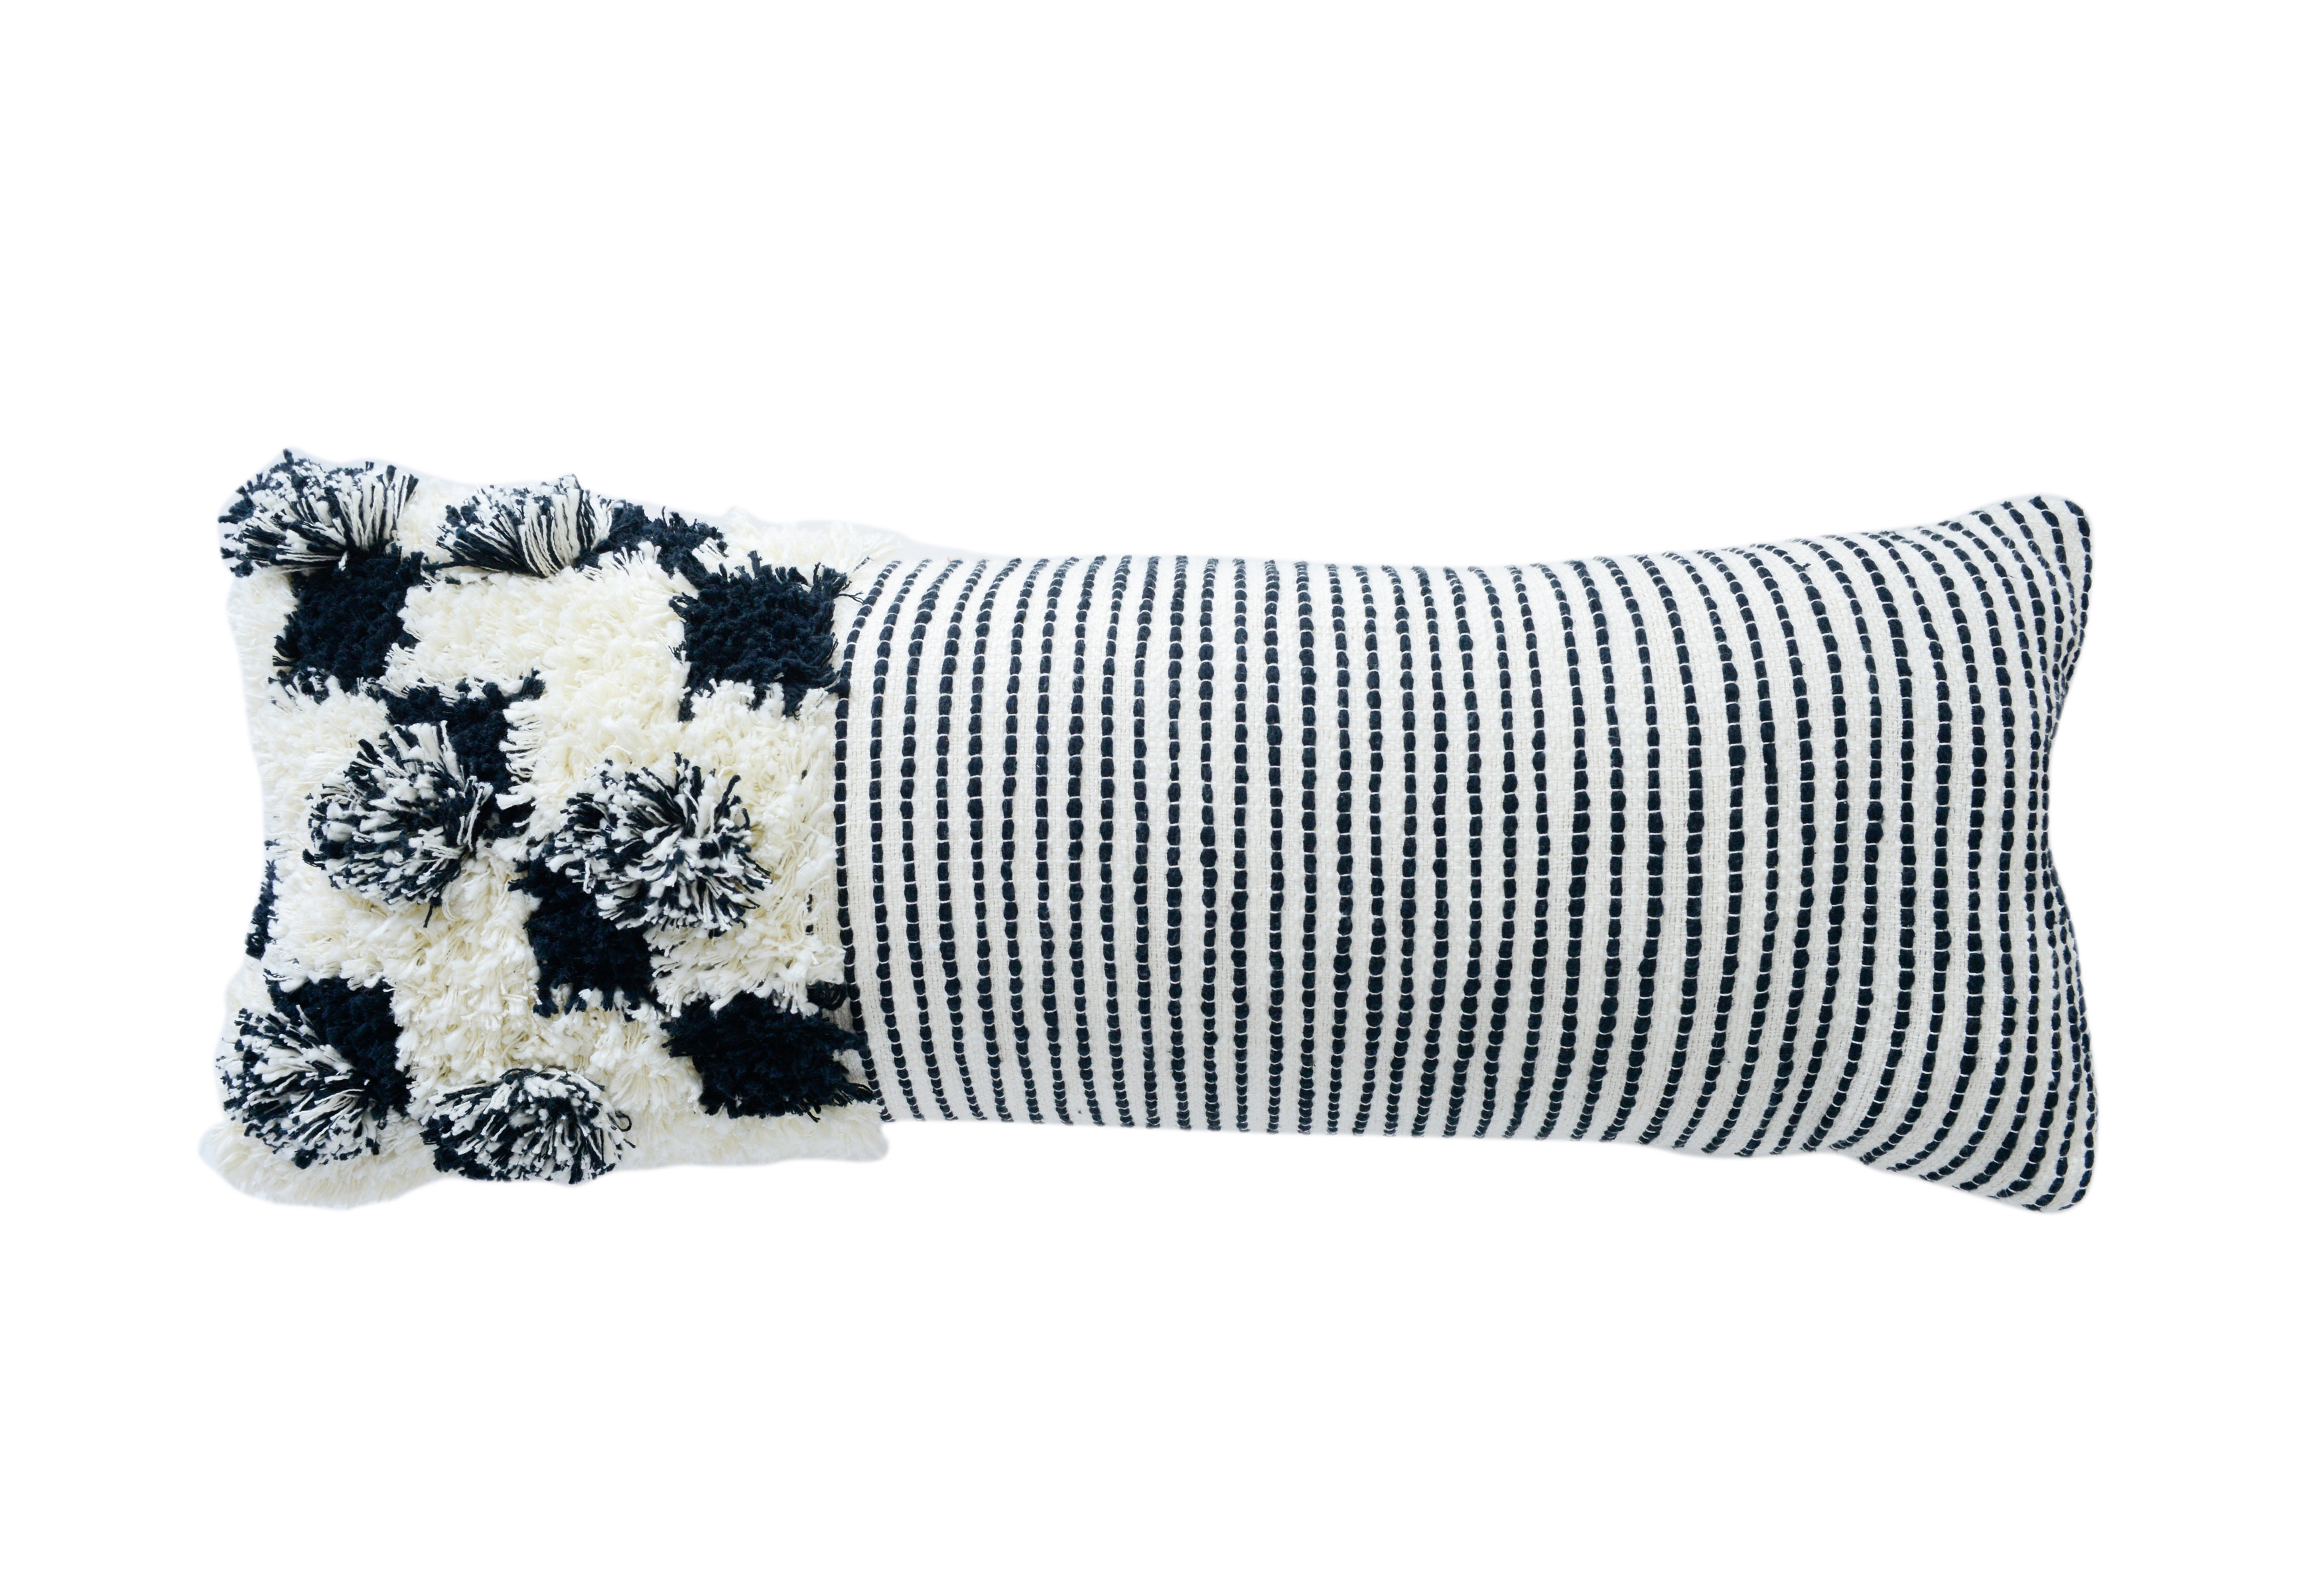 Embroidered & Appliqued Black & White Cotton Lumbar Pillow with Fringe - Image 0